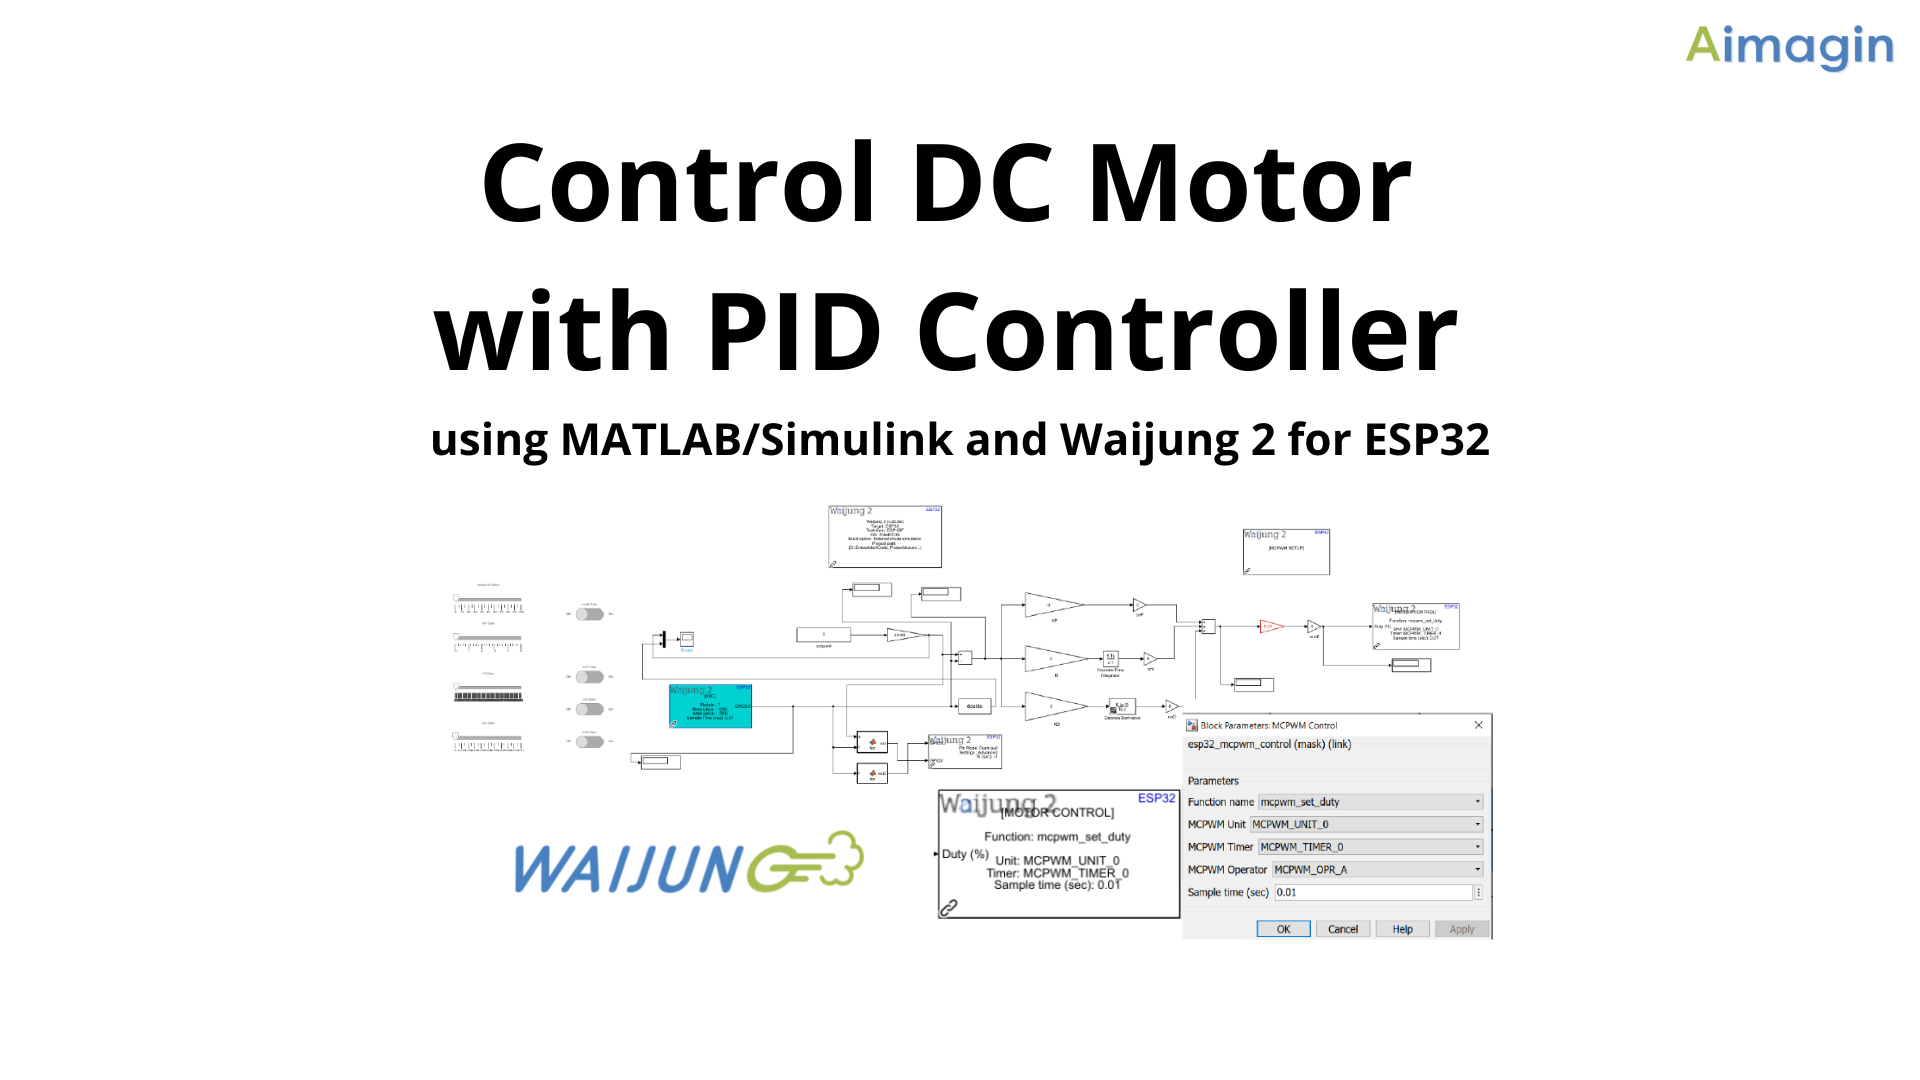 Control DC Motor with PID Controller using MATLAB/Simulink and Waijung 2 for ESP32